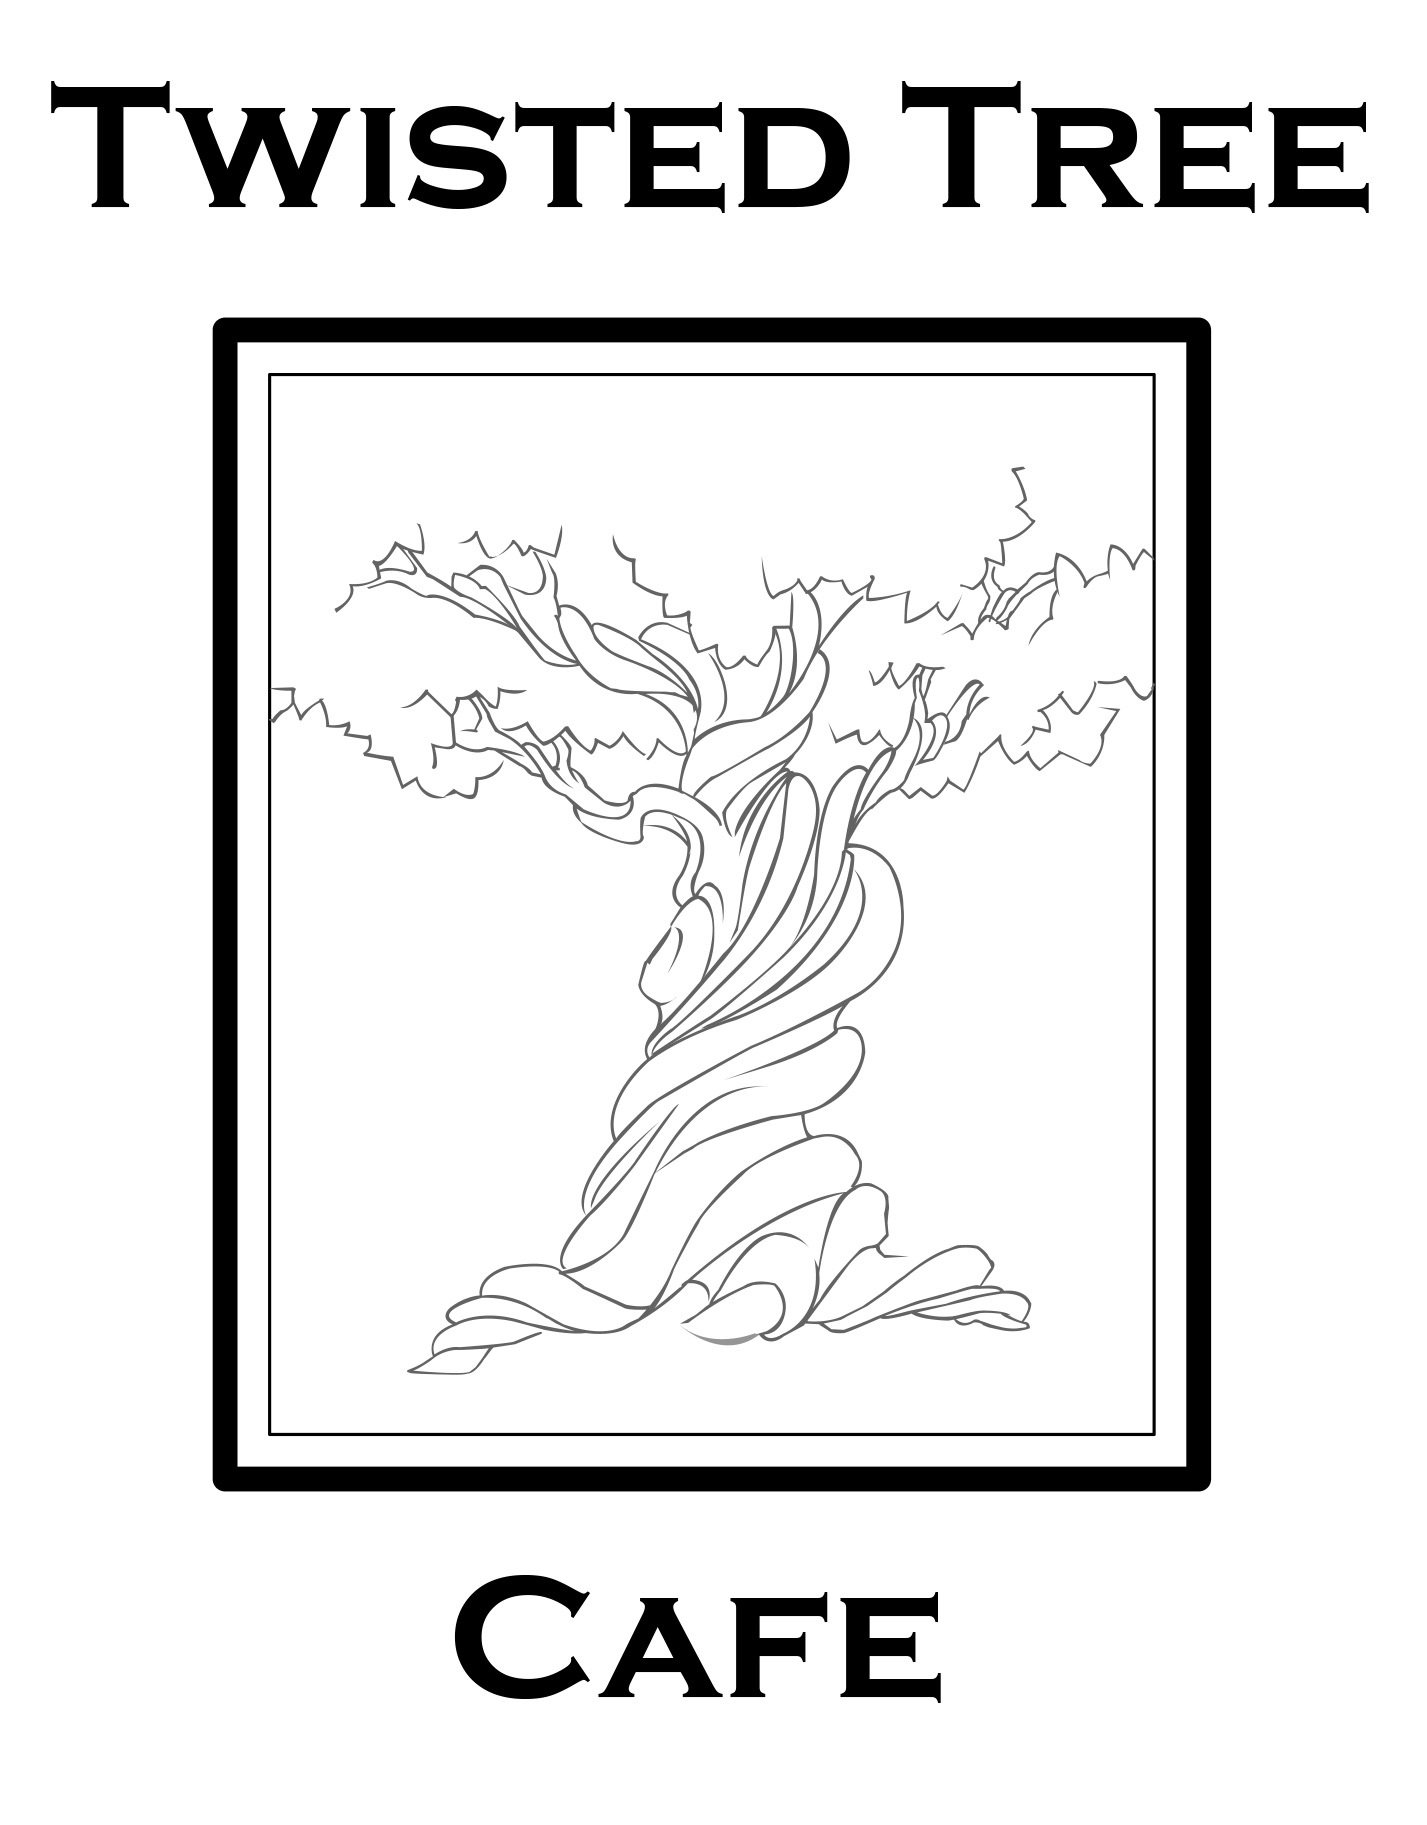 The Twisted Tree Cafe 